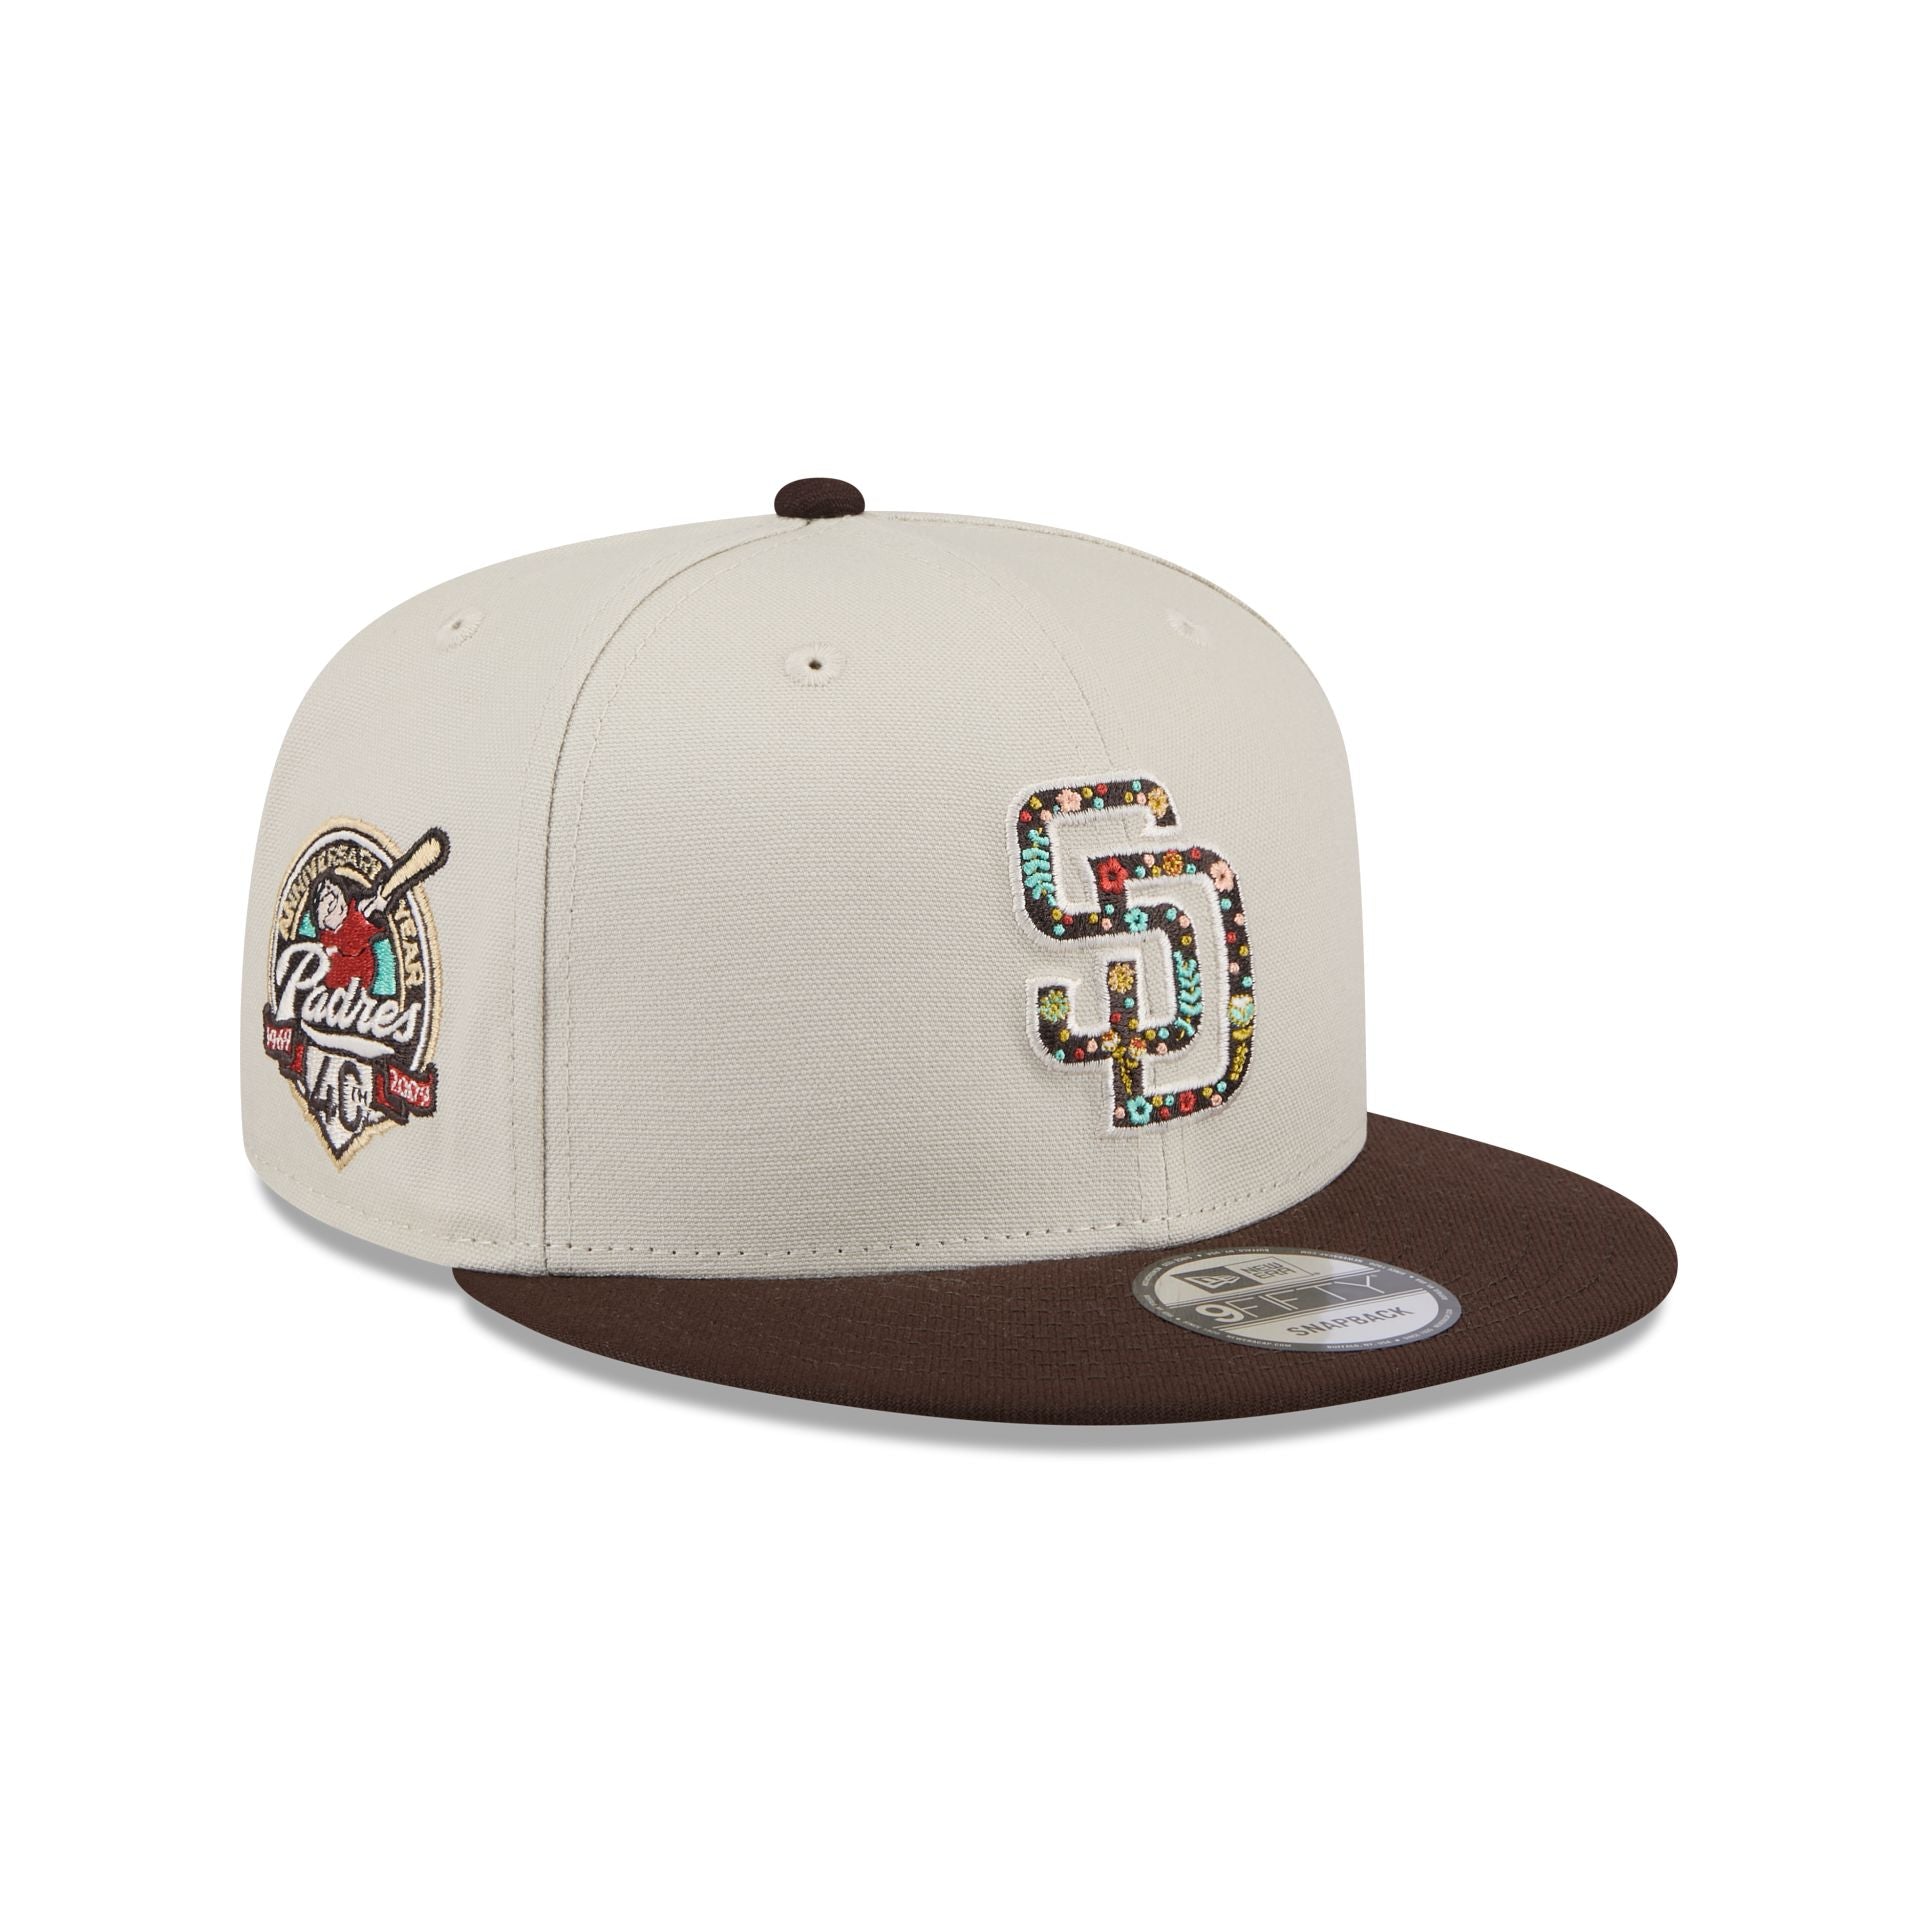 San Diego Padres Floral Fill 9FIFTY Snapback – New Era Cap